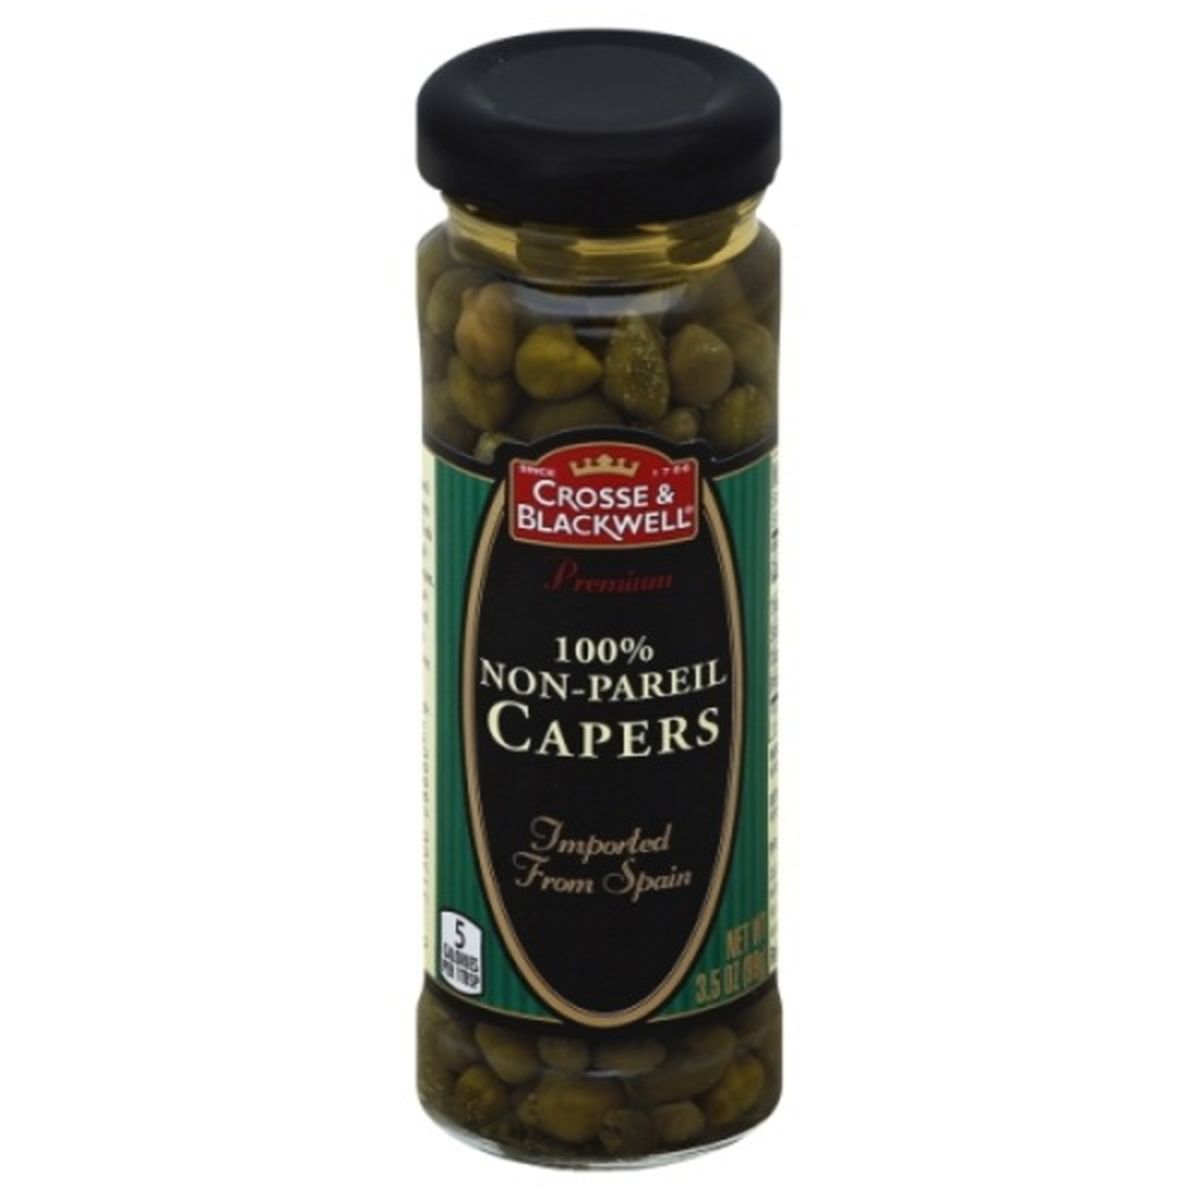 Calories in Crosse & Blackwell Capers, 100% Non-Pareil